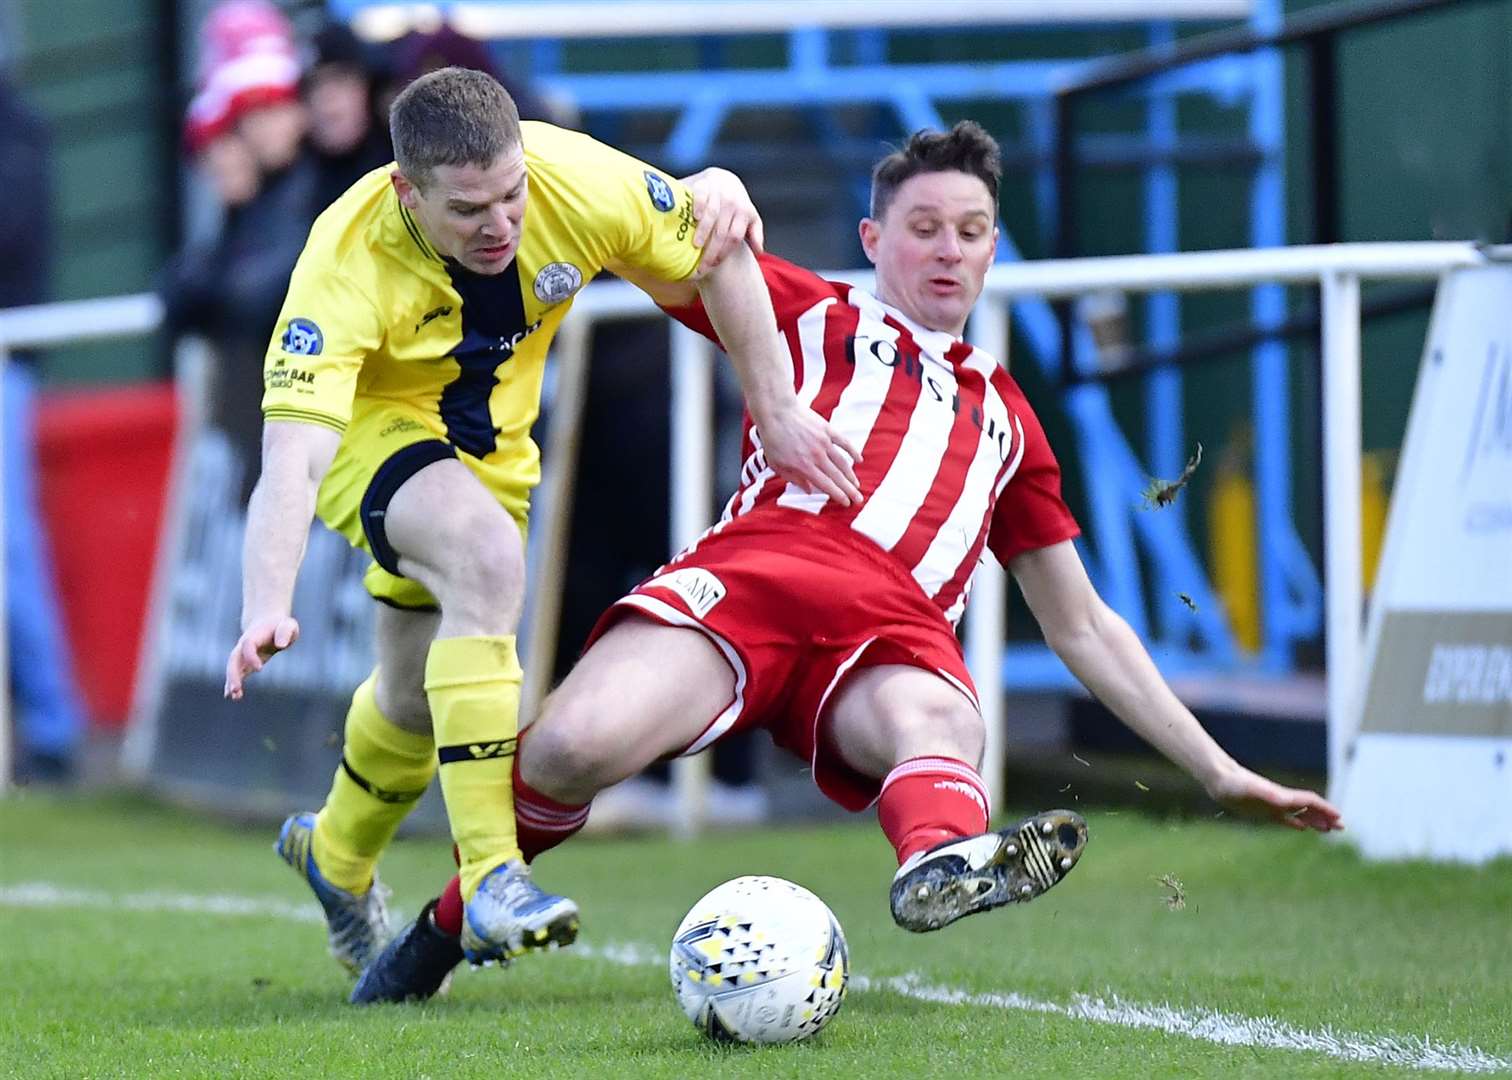 Formartine's Jonathan Crawford attempts to stop Wick's Davie Allan during the last meeting between the teams at North Lodge Park, in December 2019, when the Scorries won 2-1. Picture: Mel Roger